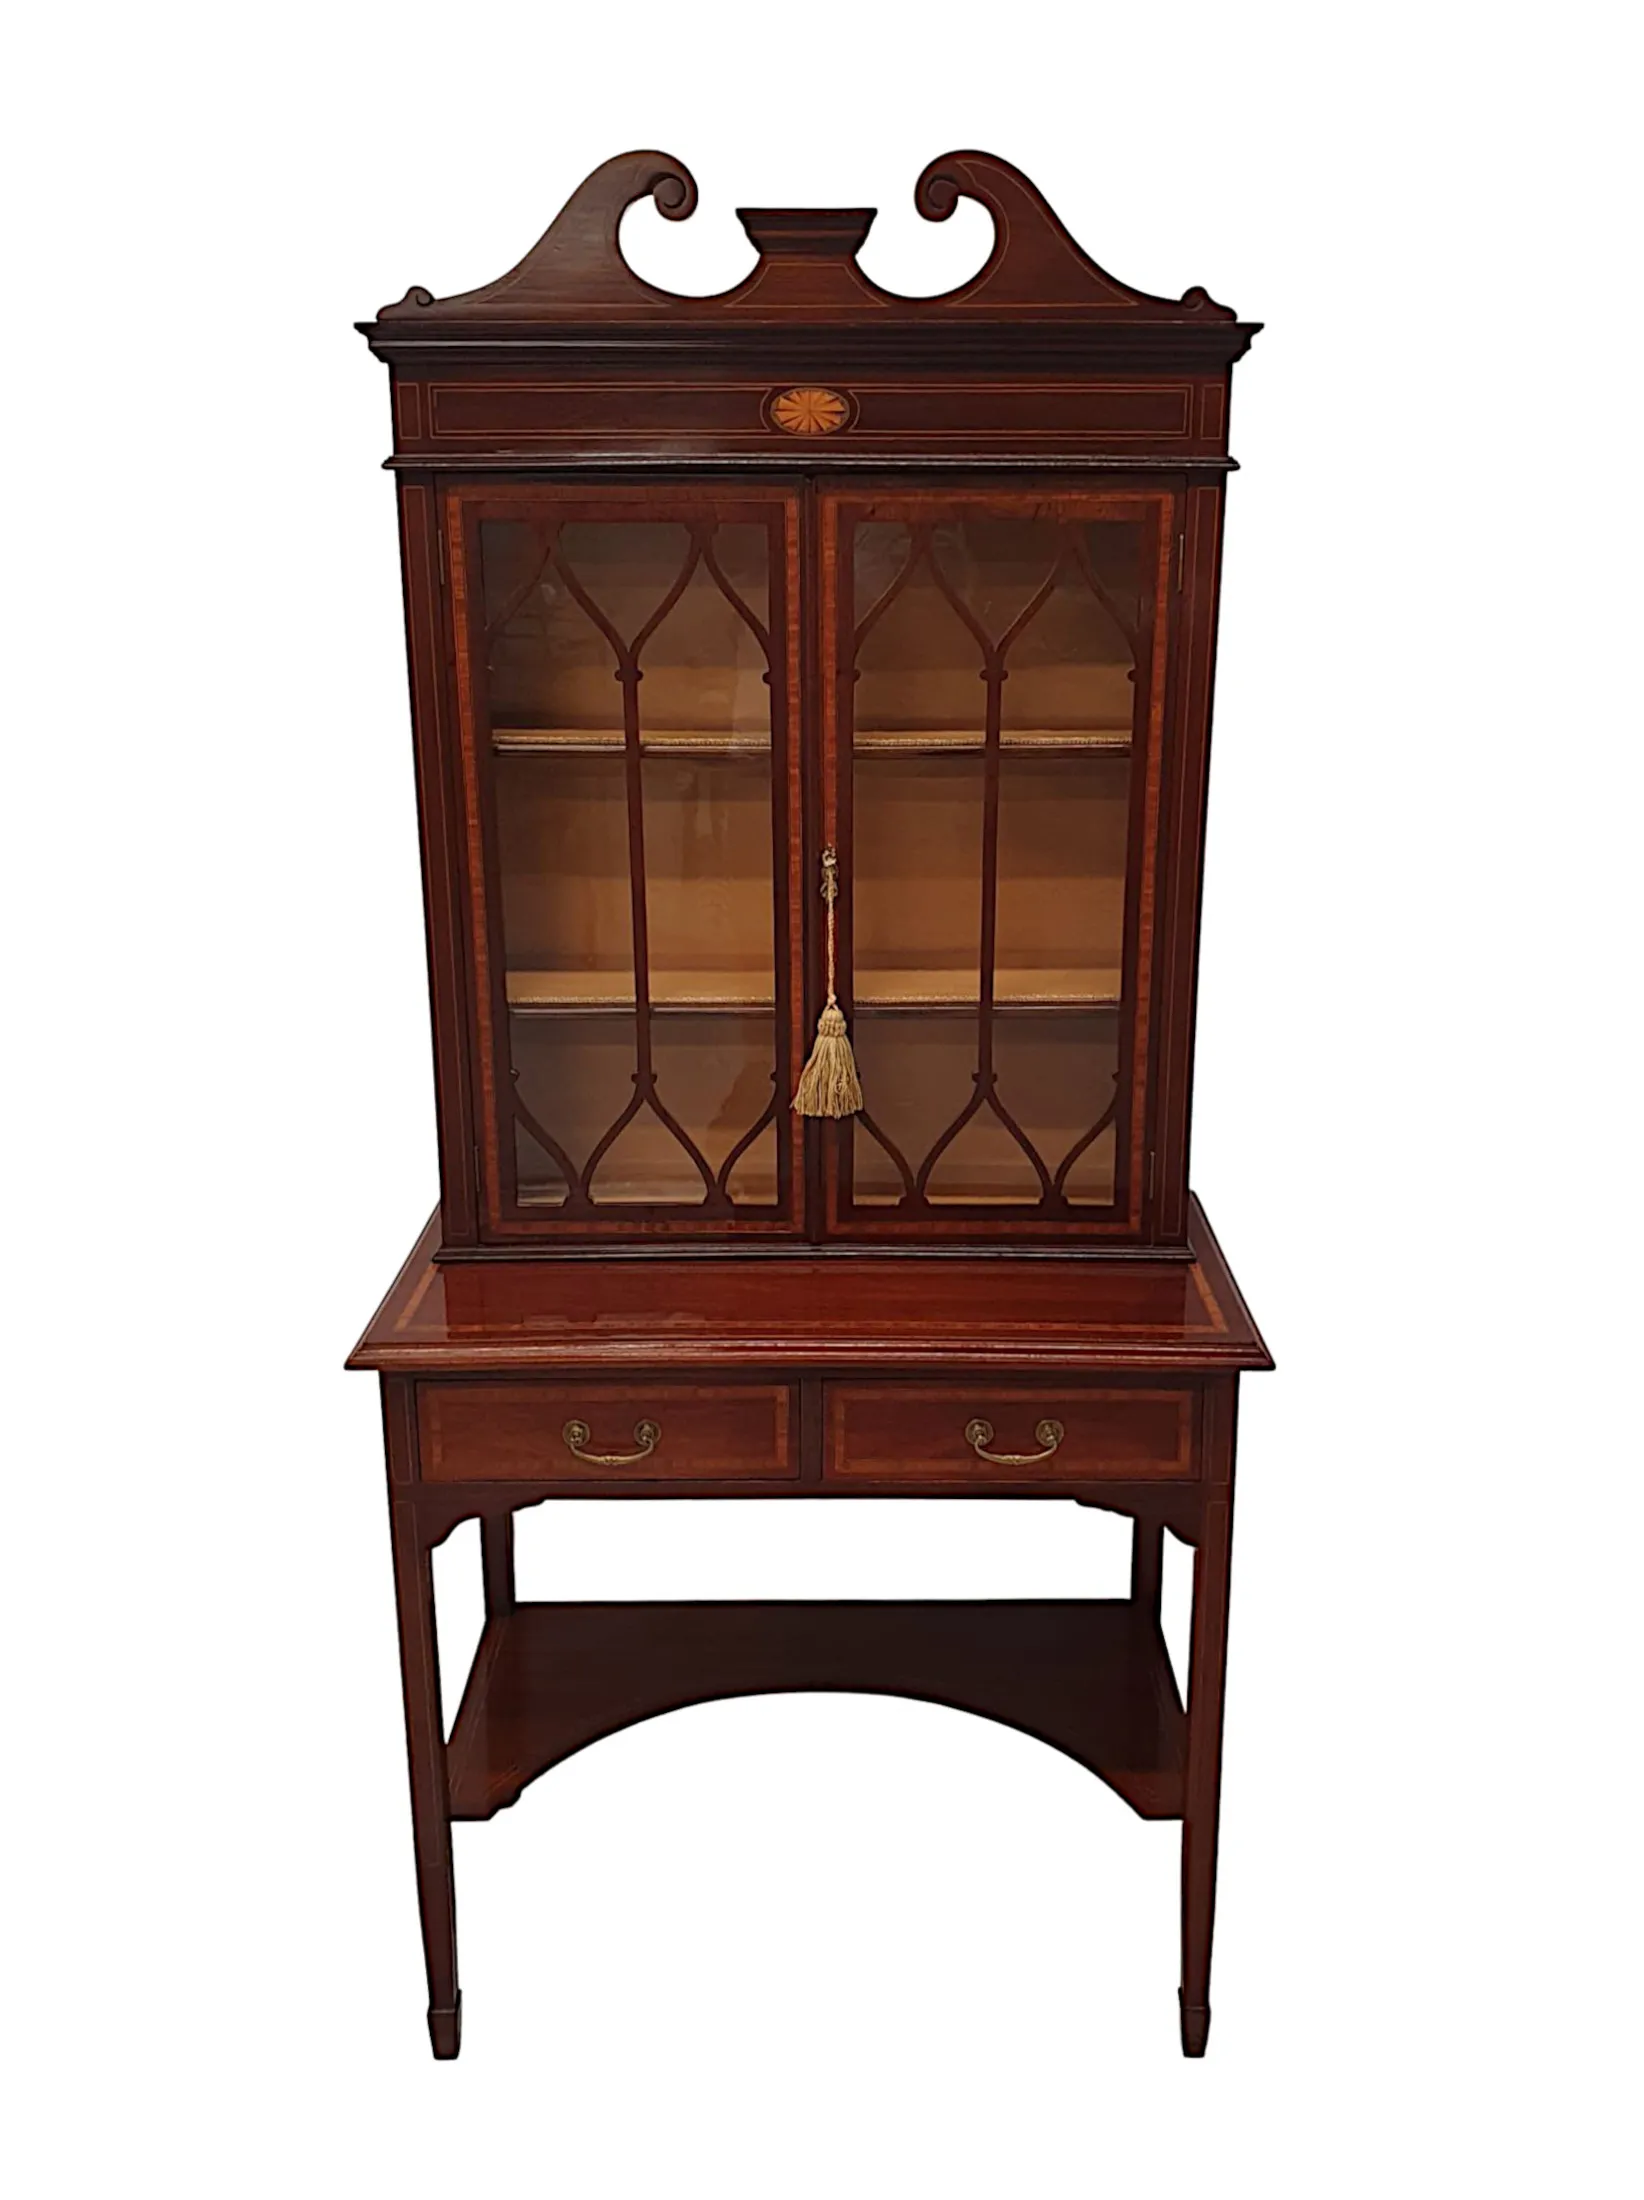 A Fabulous Edwardian Inlaid Display Case or Bookcase